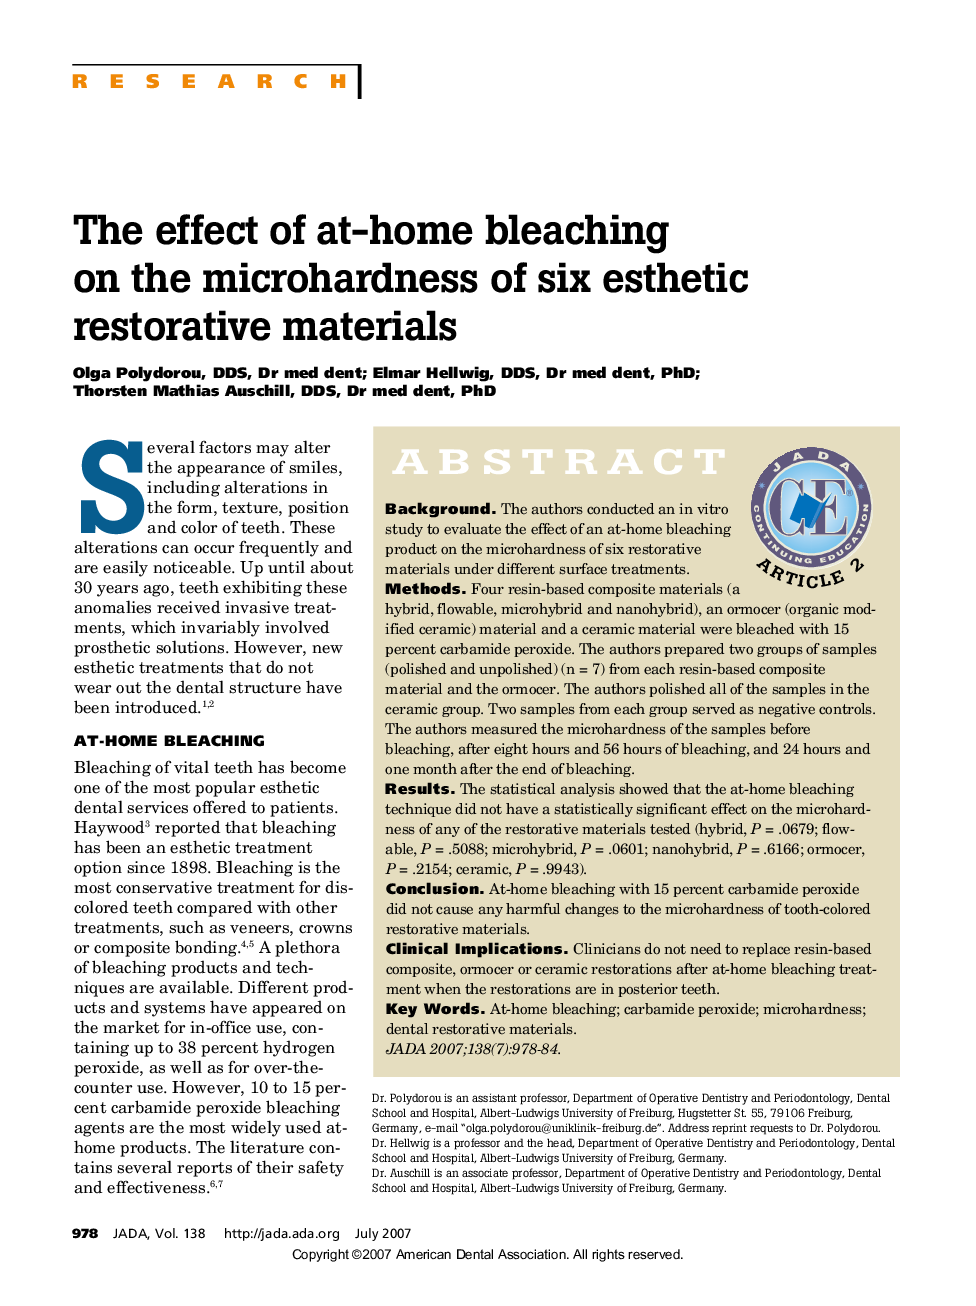 The effect of at-home bleaching on the microhardness of six esthetic restorative materials